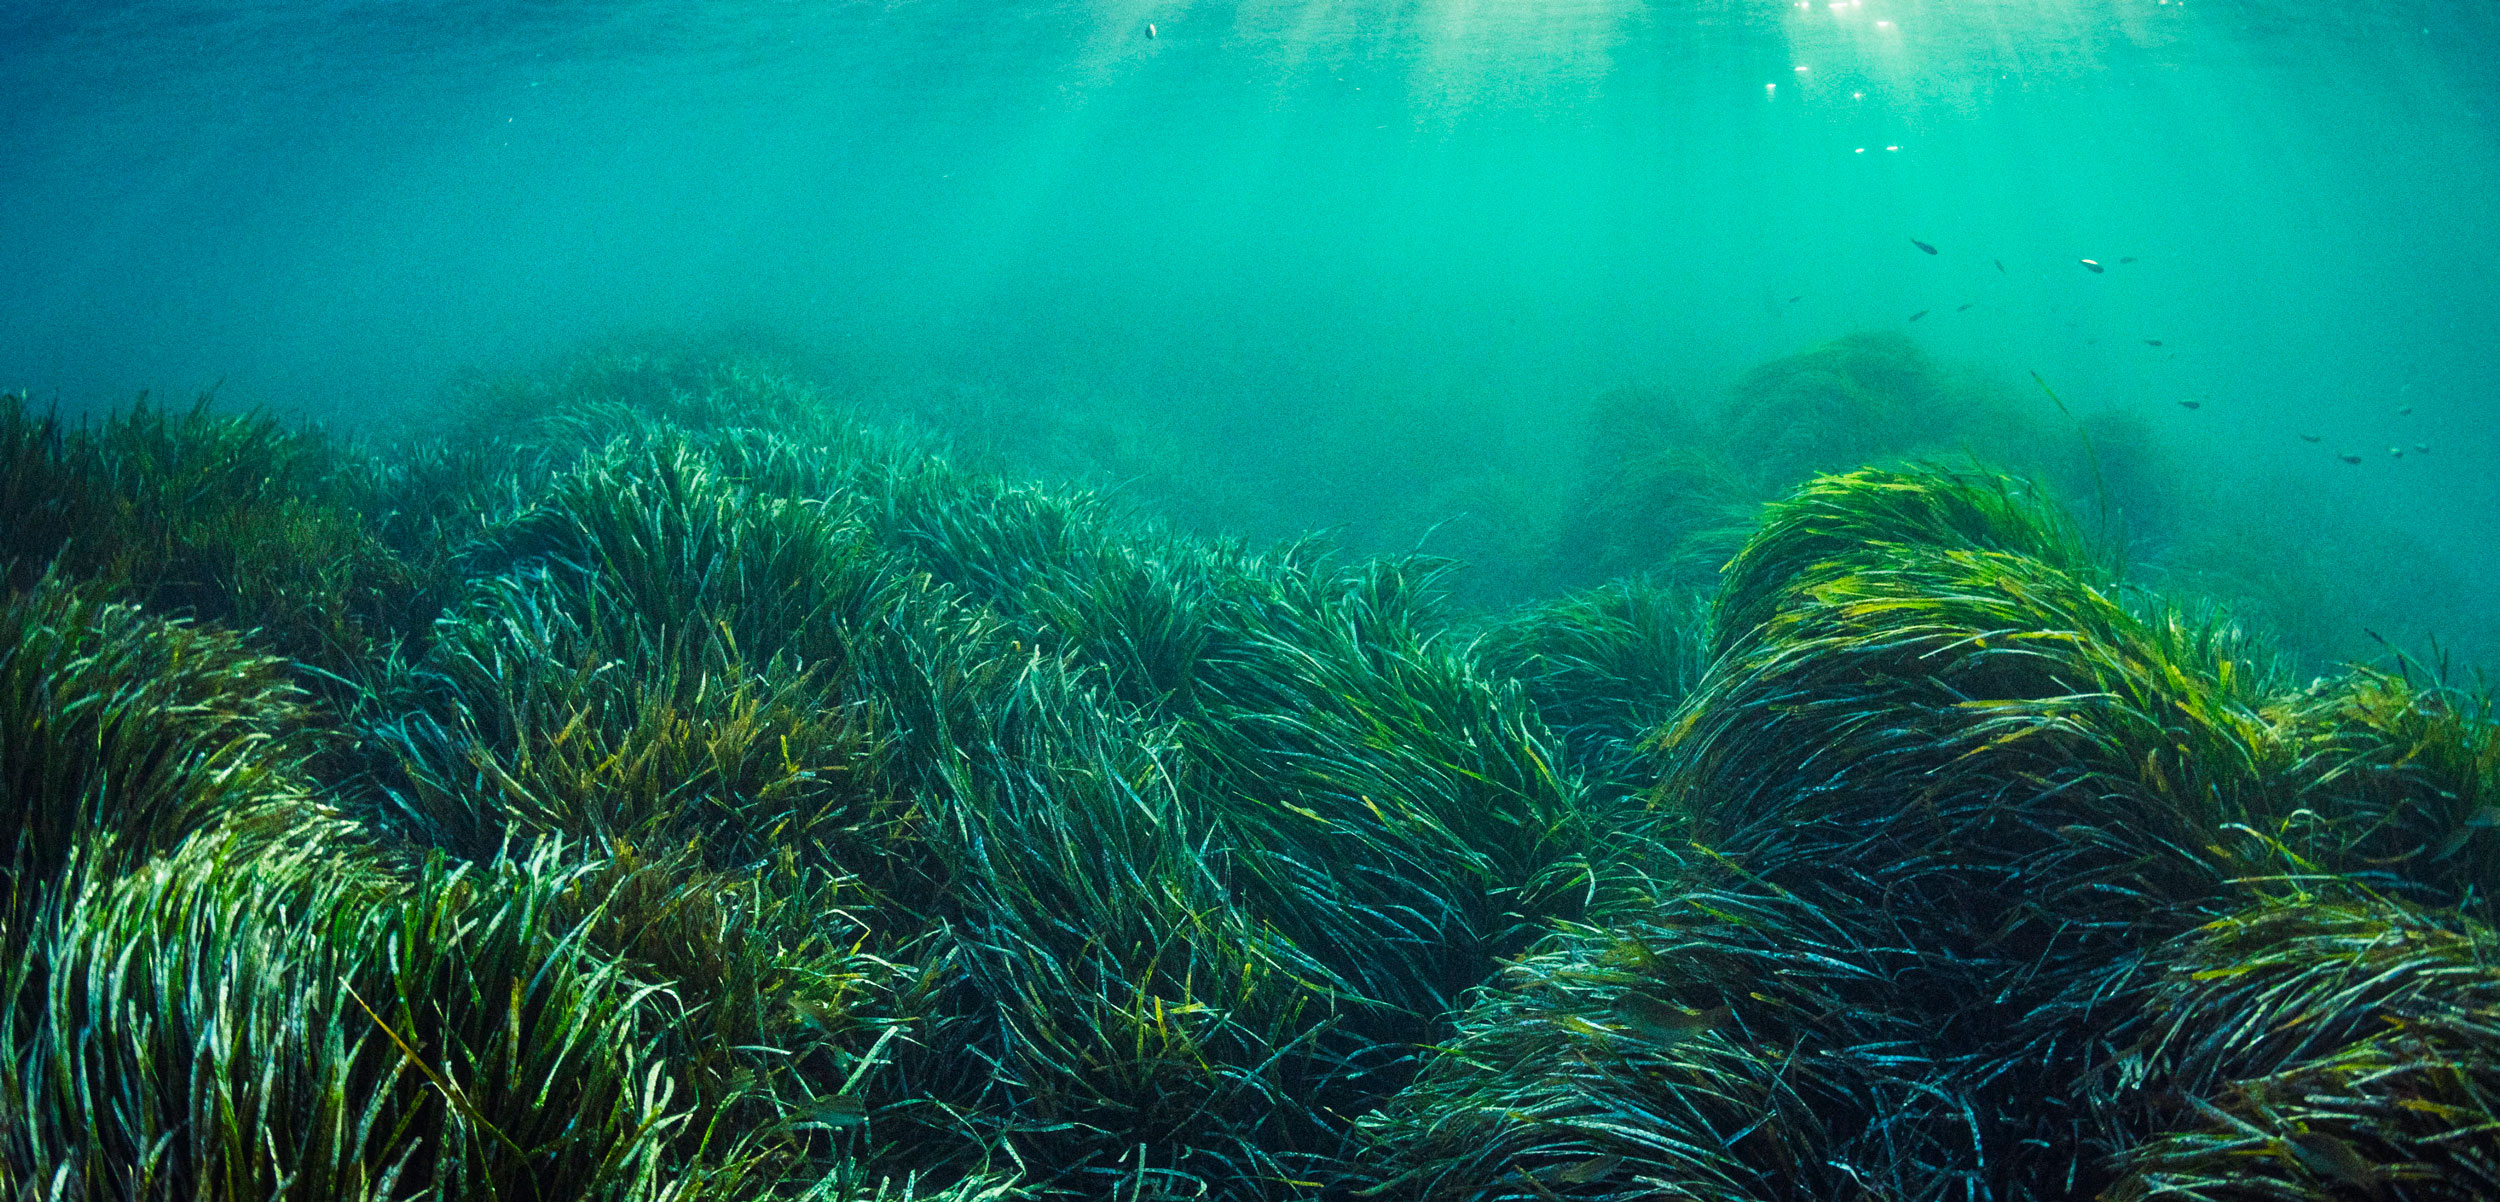 Noise Pollution Affects Practically Everything, Even Seagrass